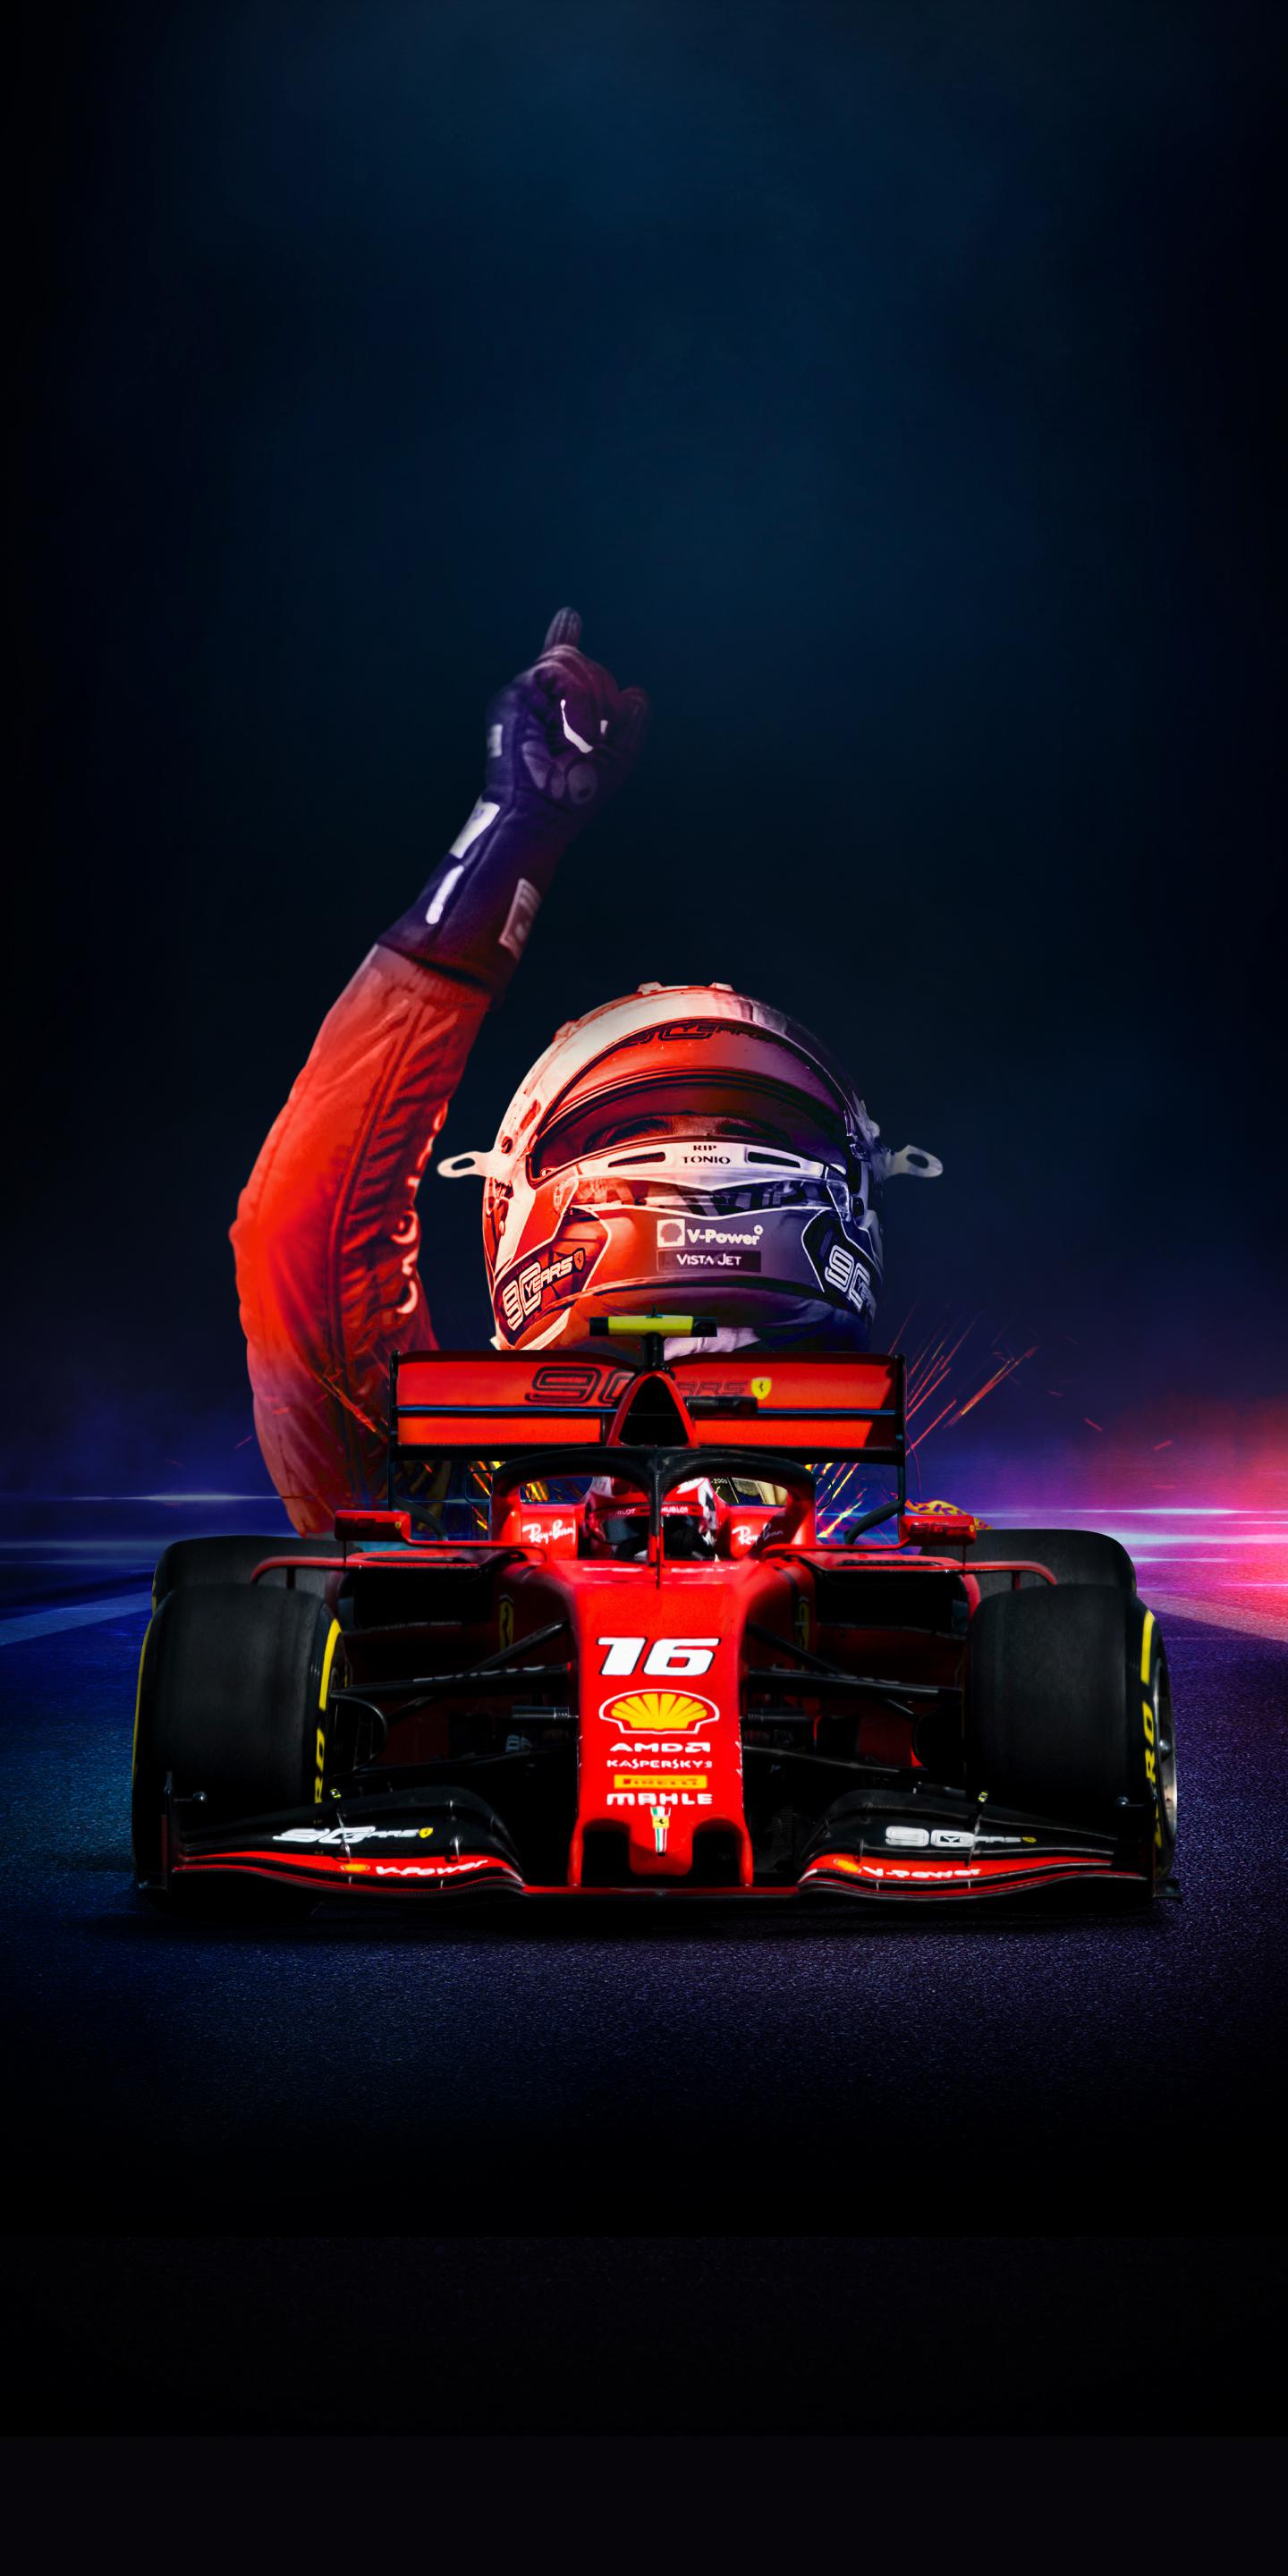 Next: Mobile wallpaper of Charles Leclerc